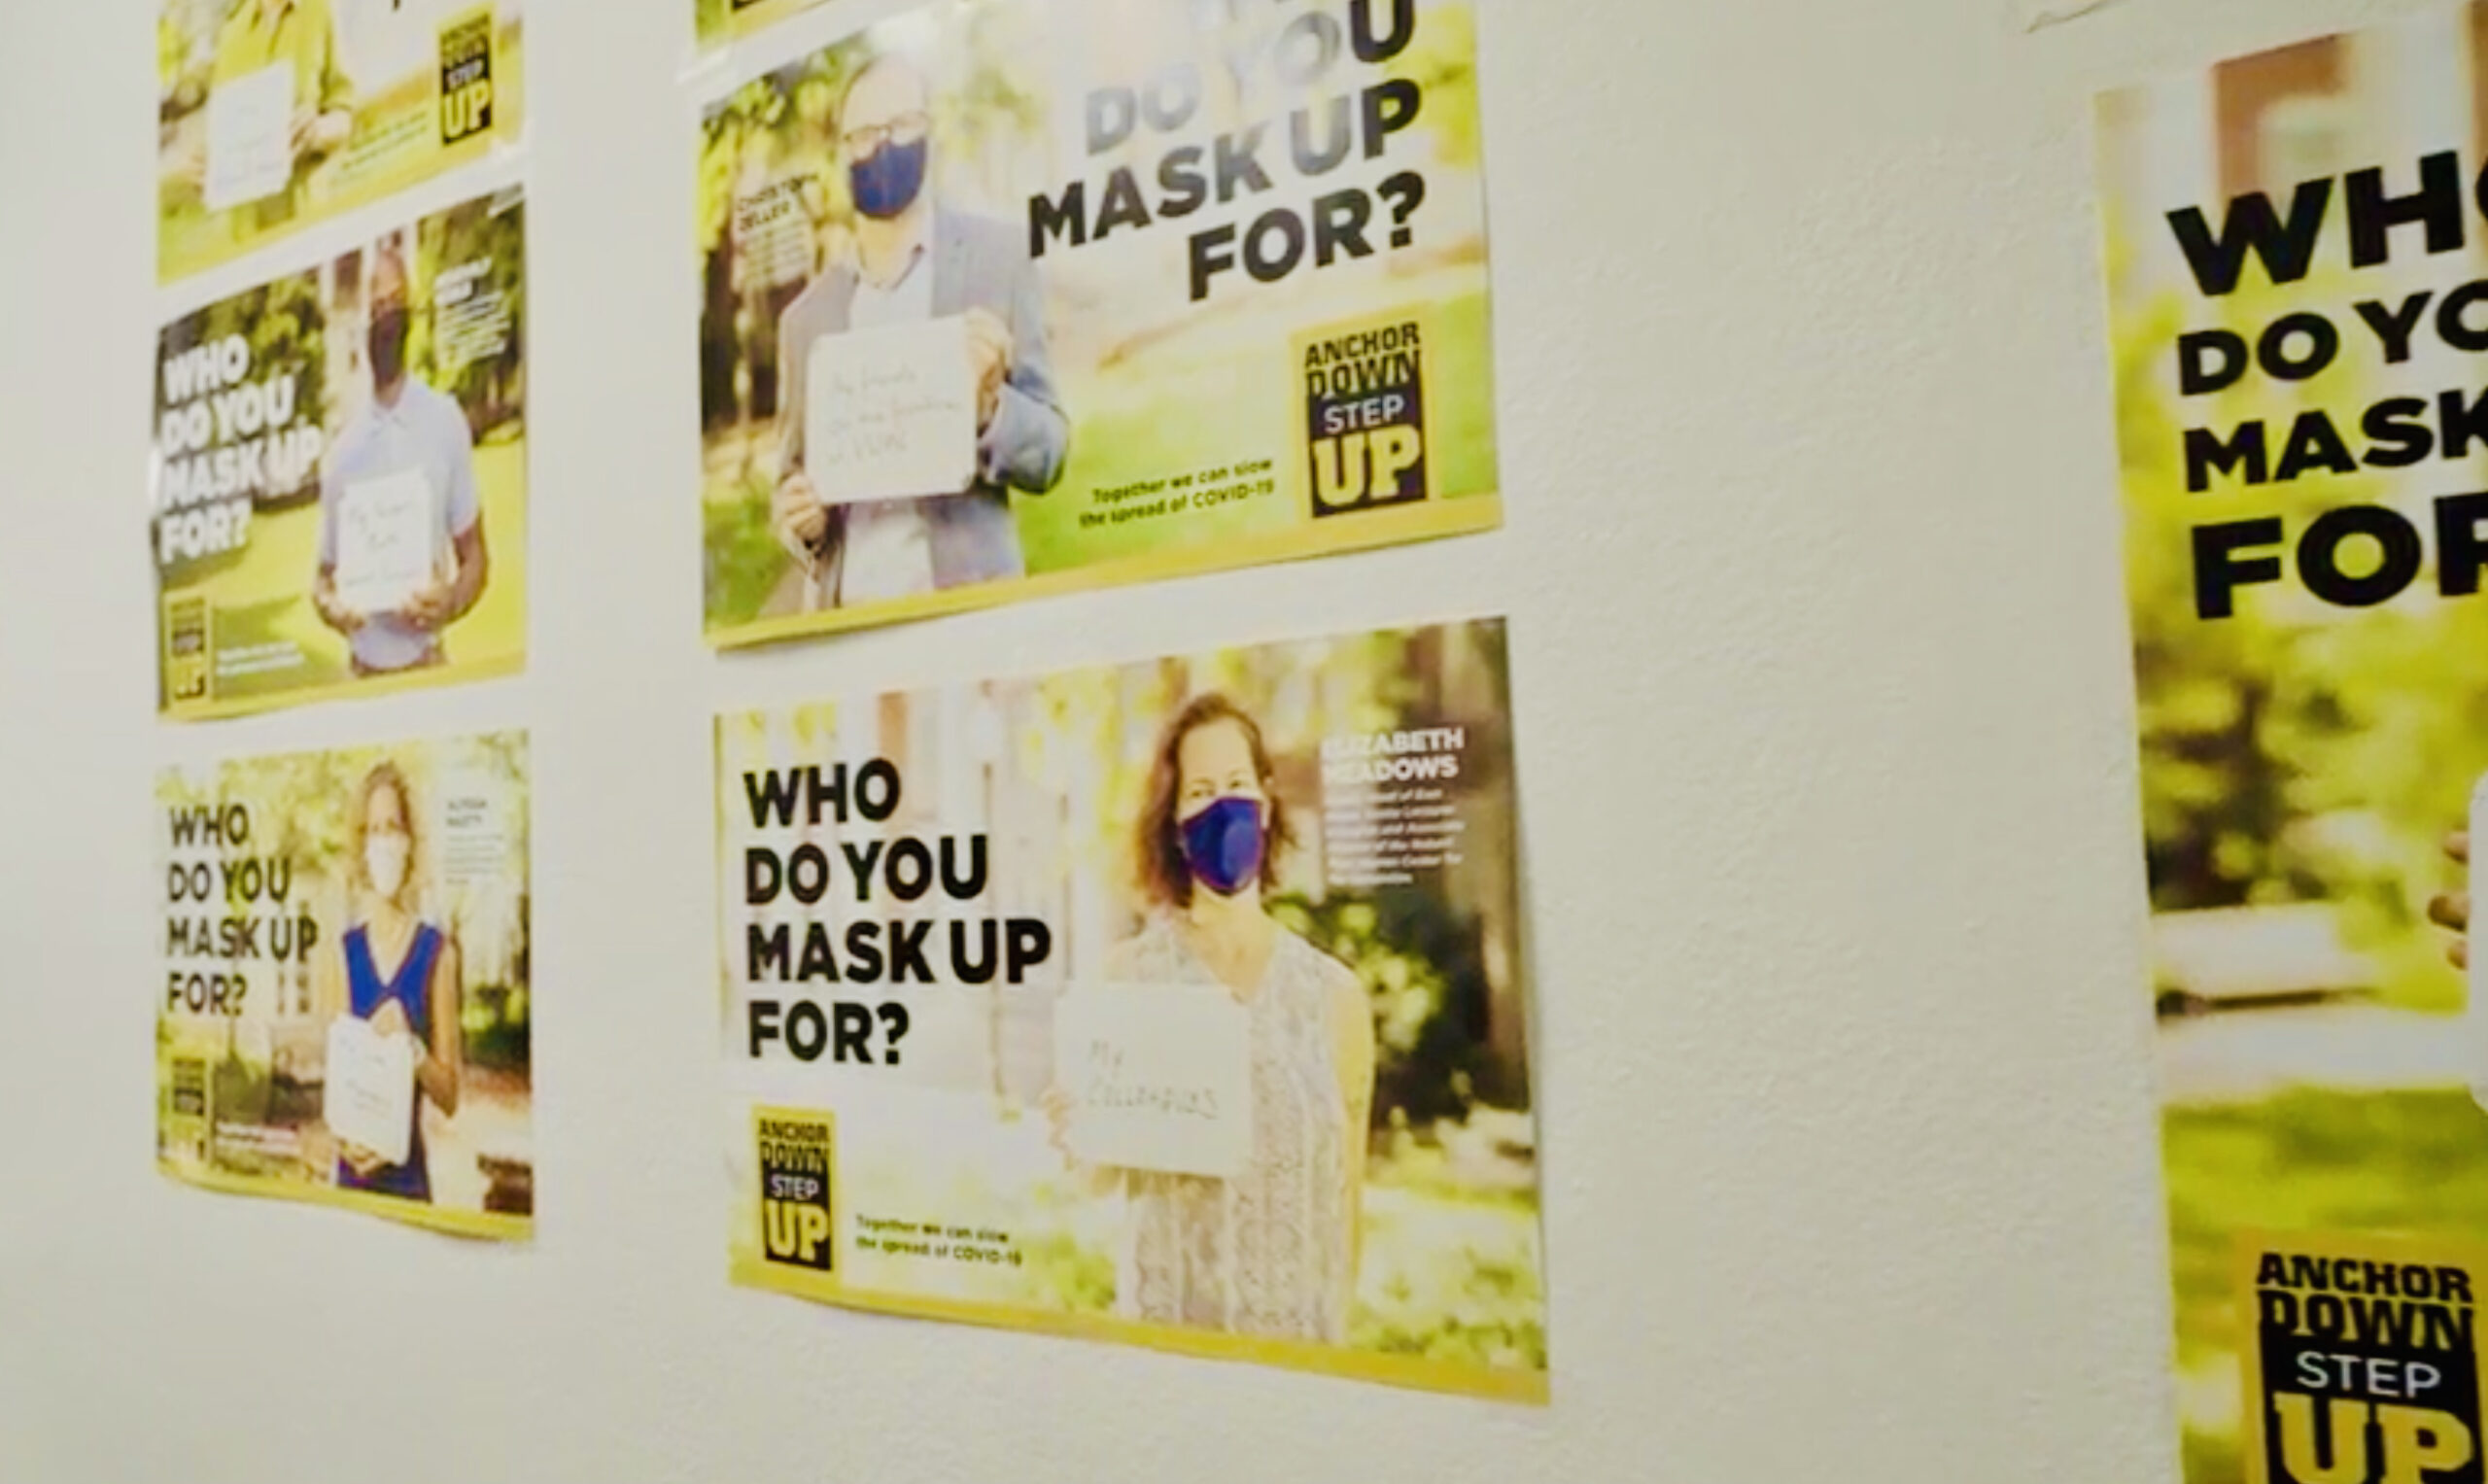 These posters highlight faculty and staff in the #AnchorDownMaskUp campaign.